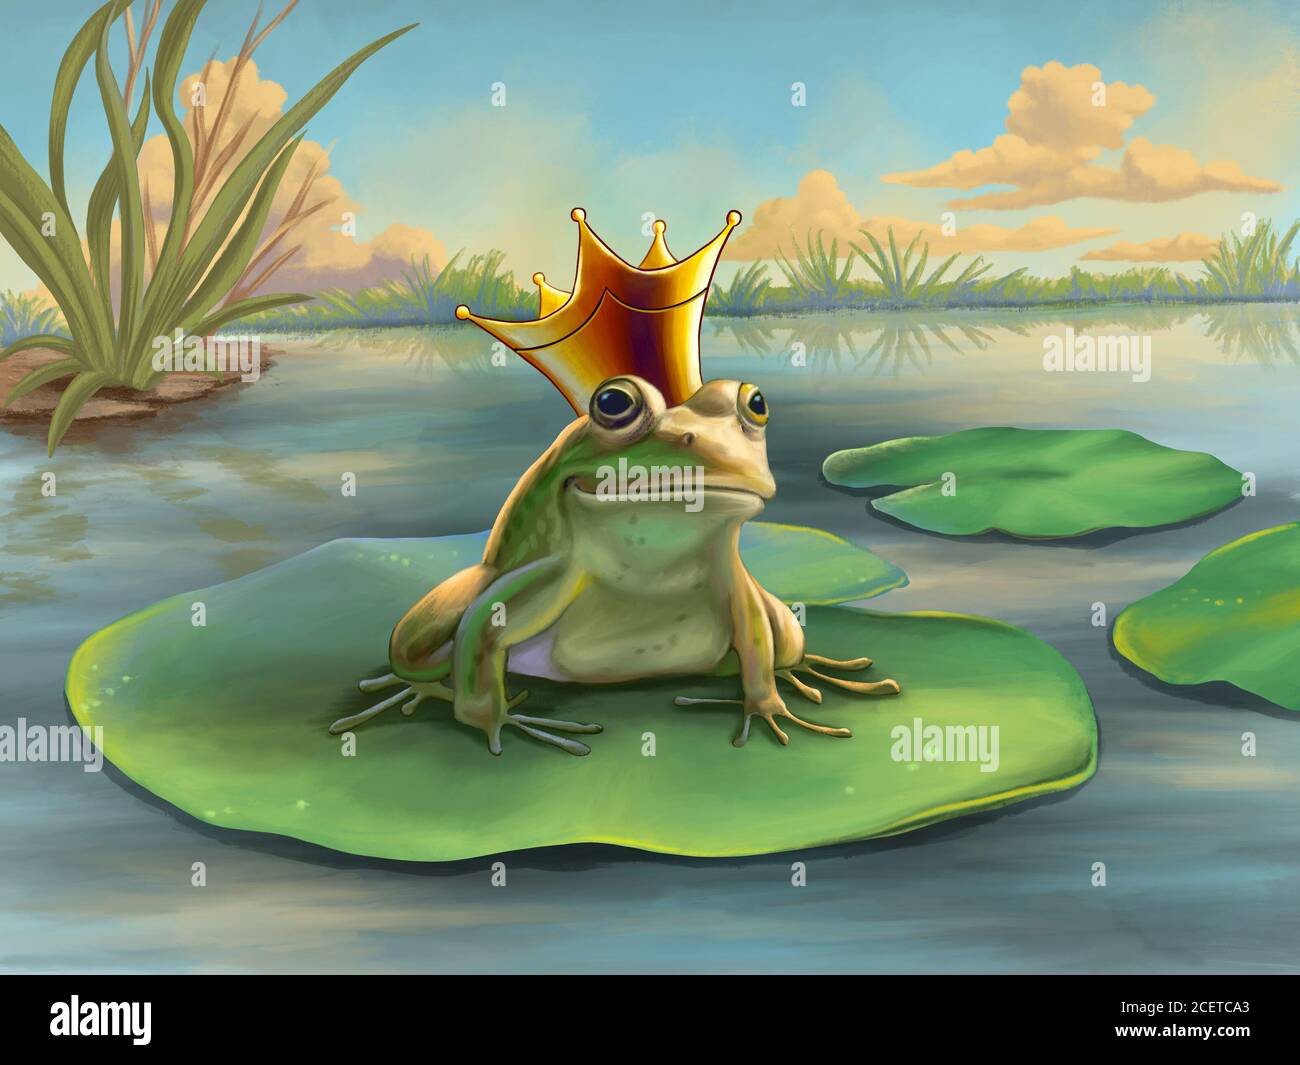 Frog prince waiting on a water lily. Digital illustration. Stock Photo